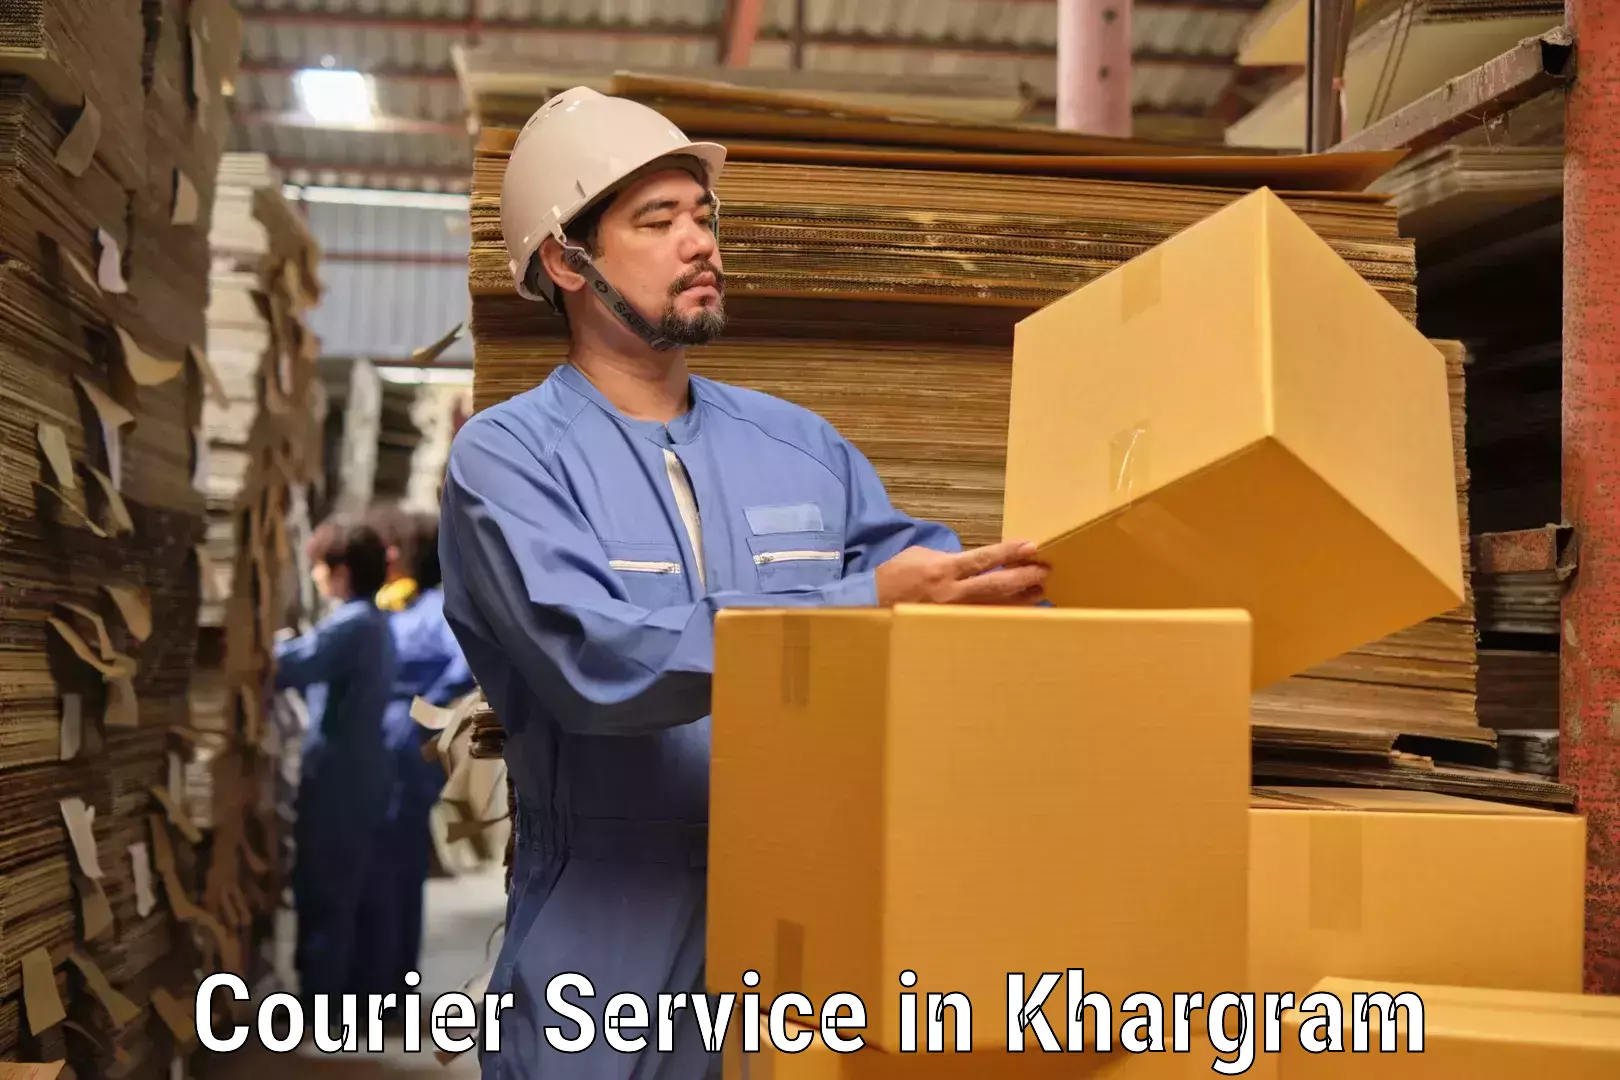 Specialized courier services in Khargram